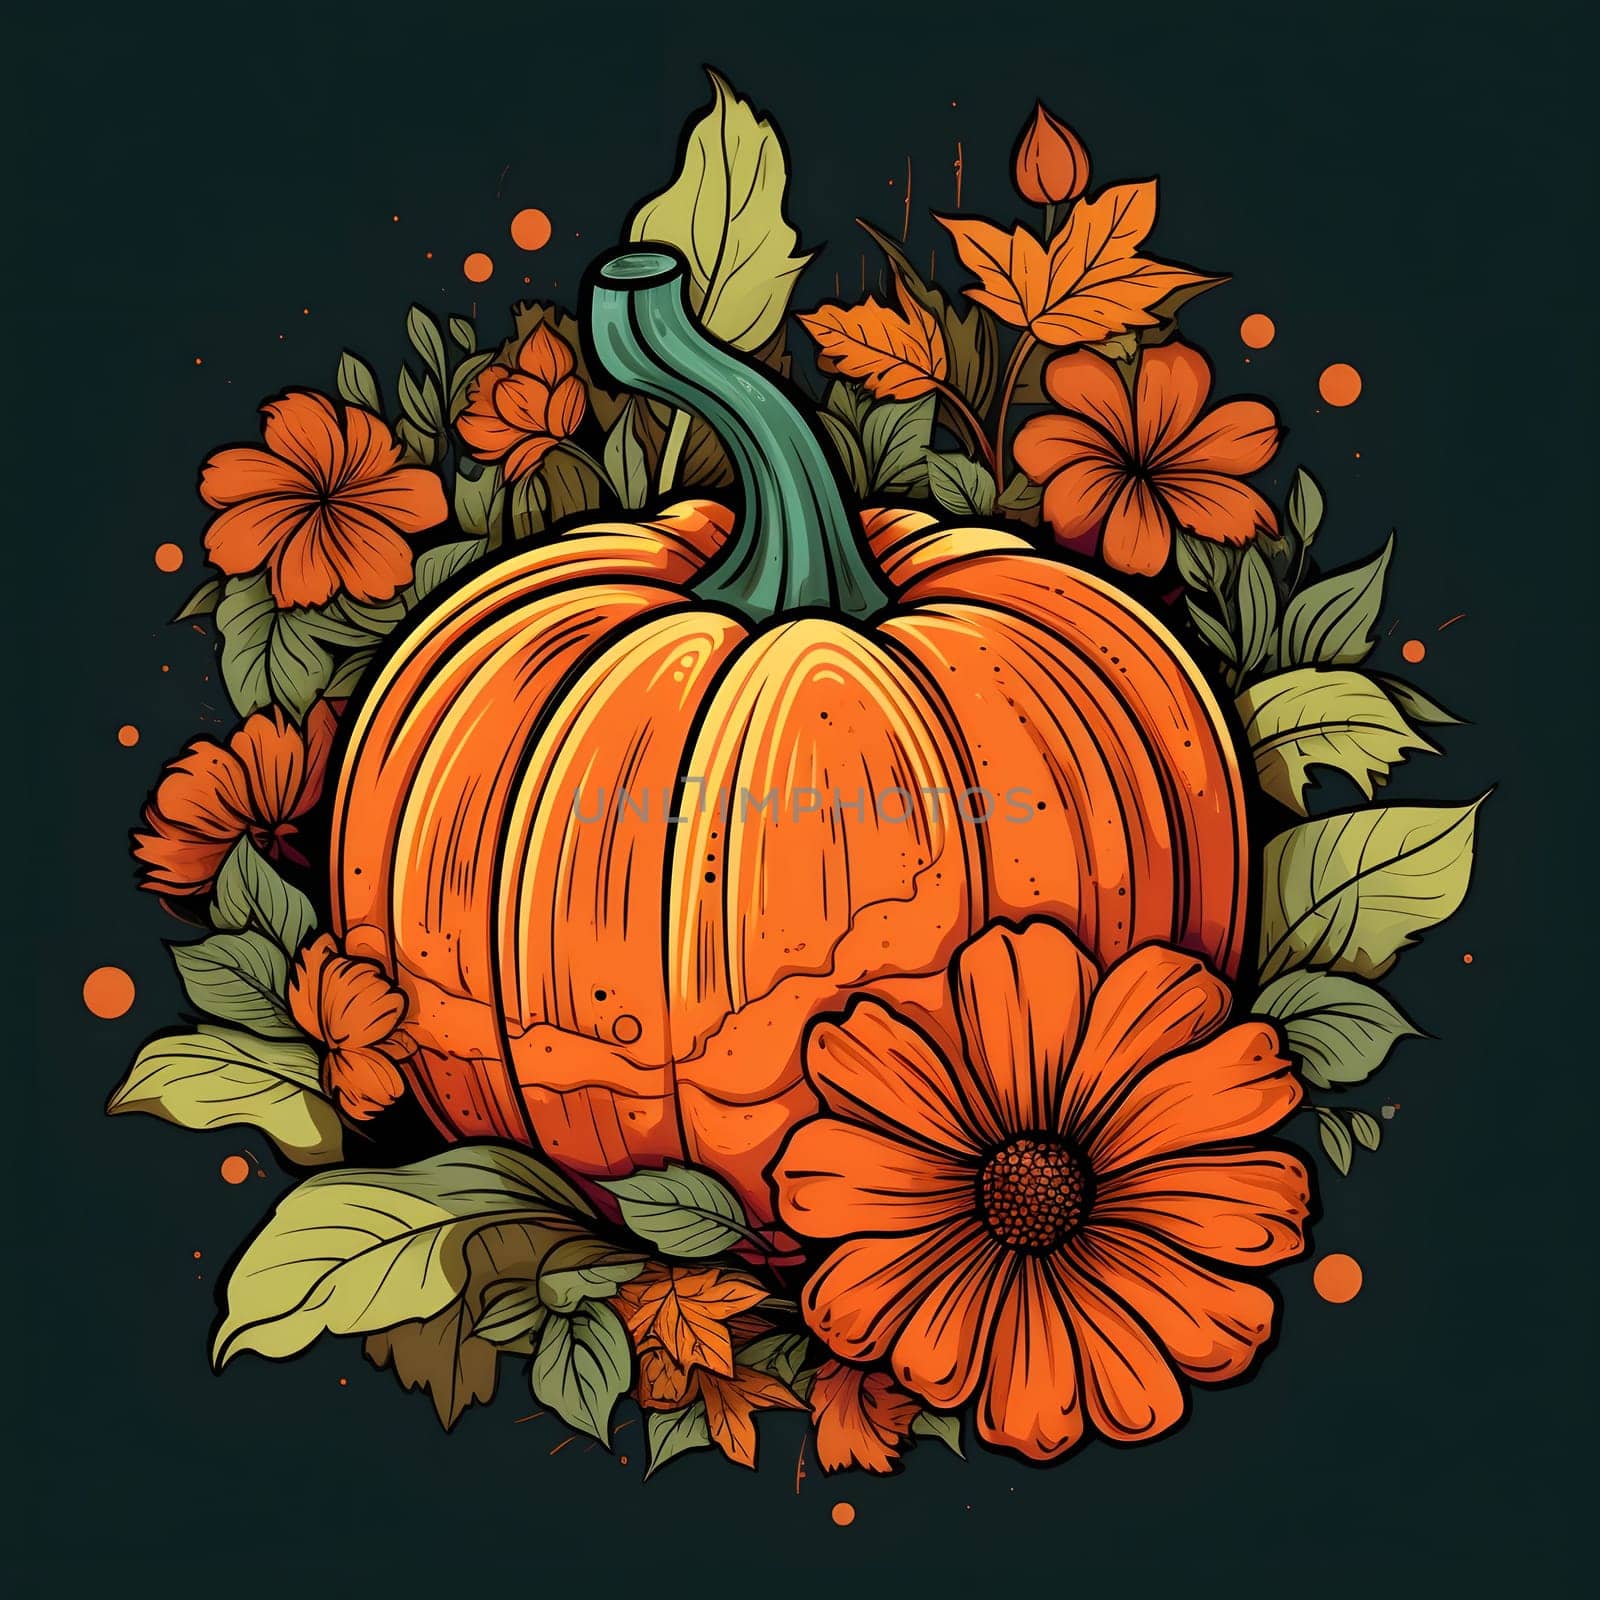 Pumpkin with flowers and leaves on a dark background. Pumpkin as a dish of thanksgiving for the harvest. by ThemesS